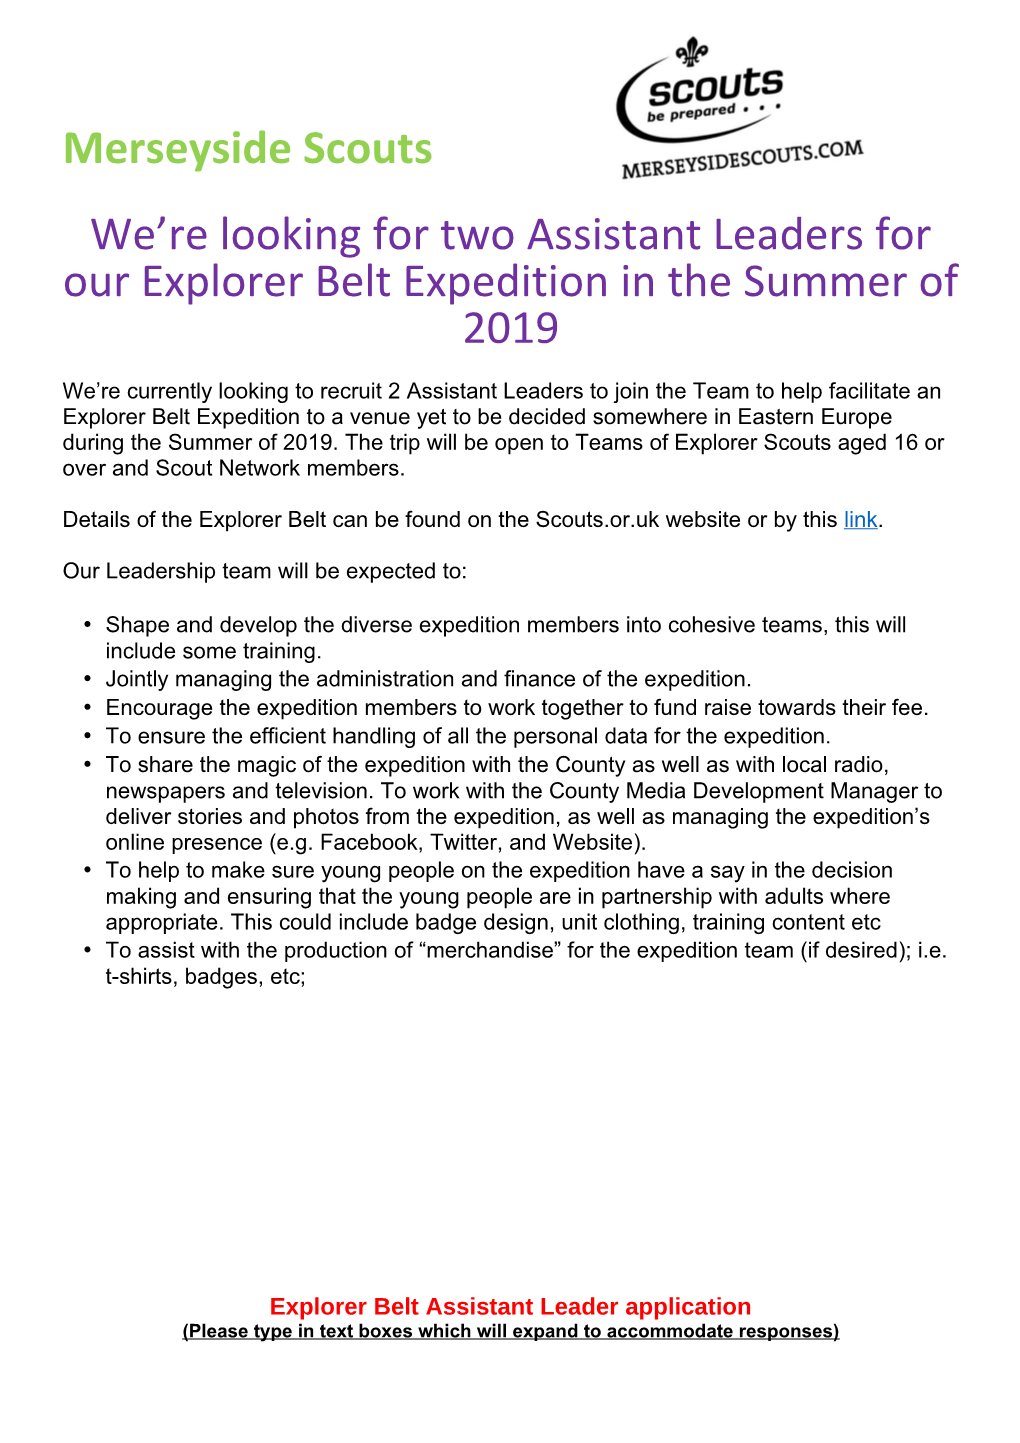 We Re Looking for Two Assistant Leaders for Our Explorer Belt Expedition in the Summer of 2019